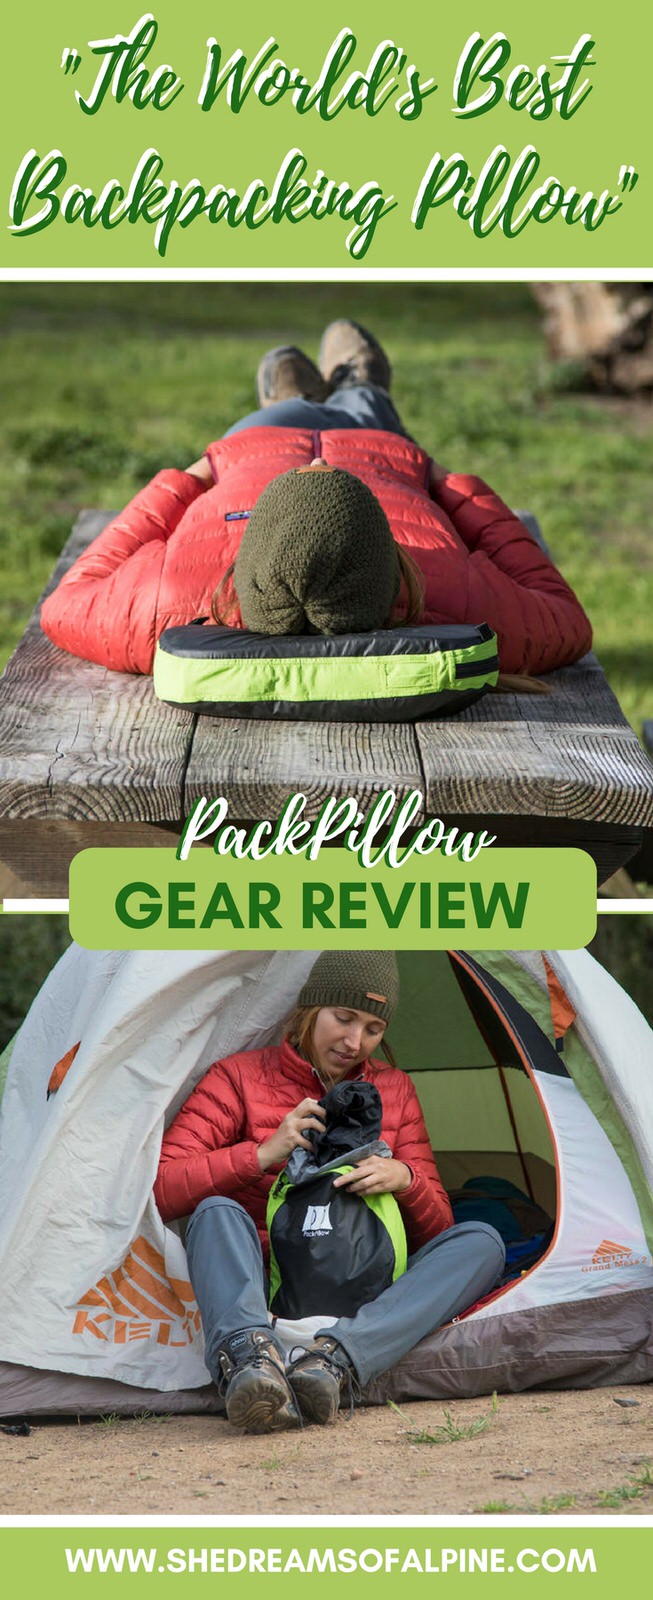 Field Testing the PackPillow Backpacking Pillow